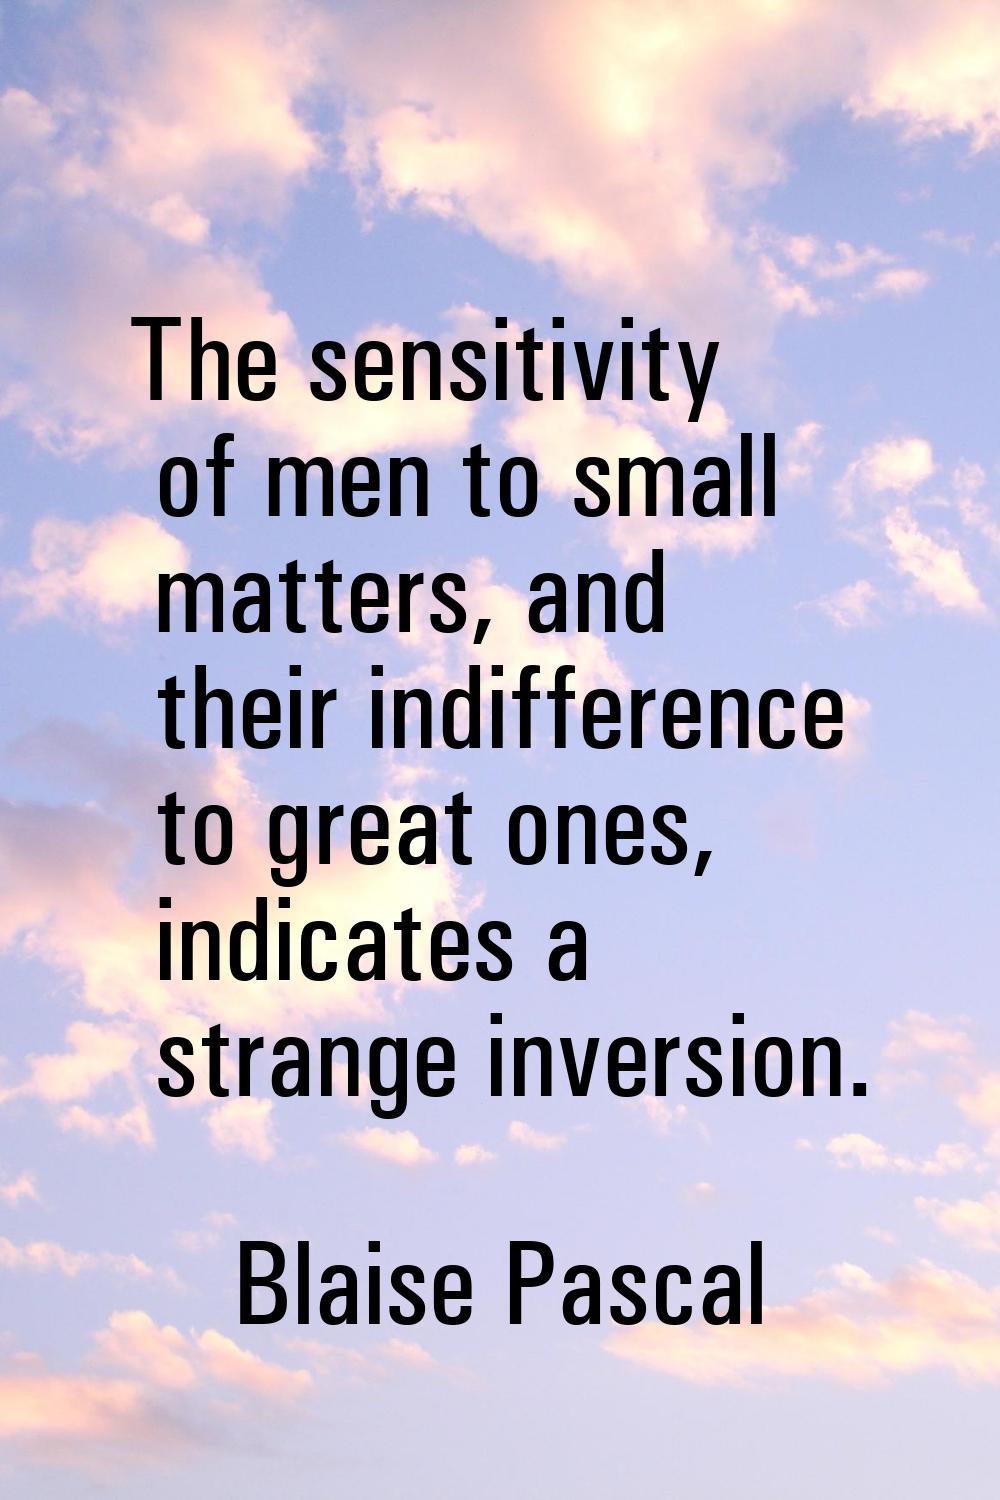 The sensitivity of men to small matters, and their indifference to great ones, indicates a strange 